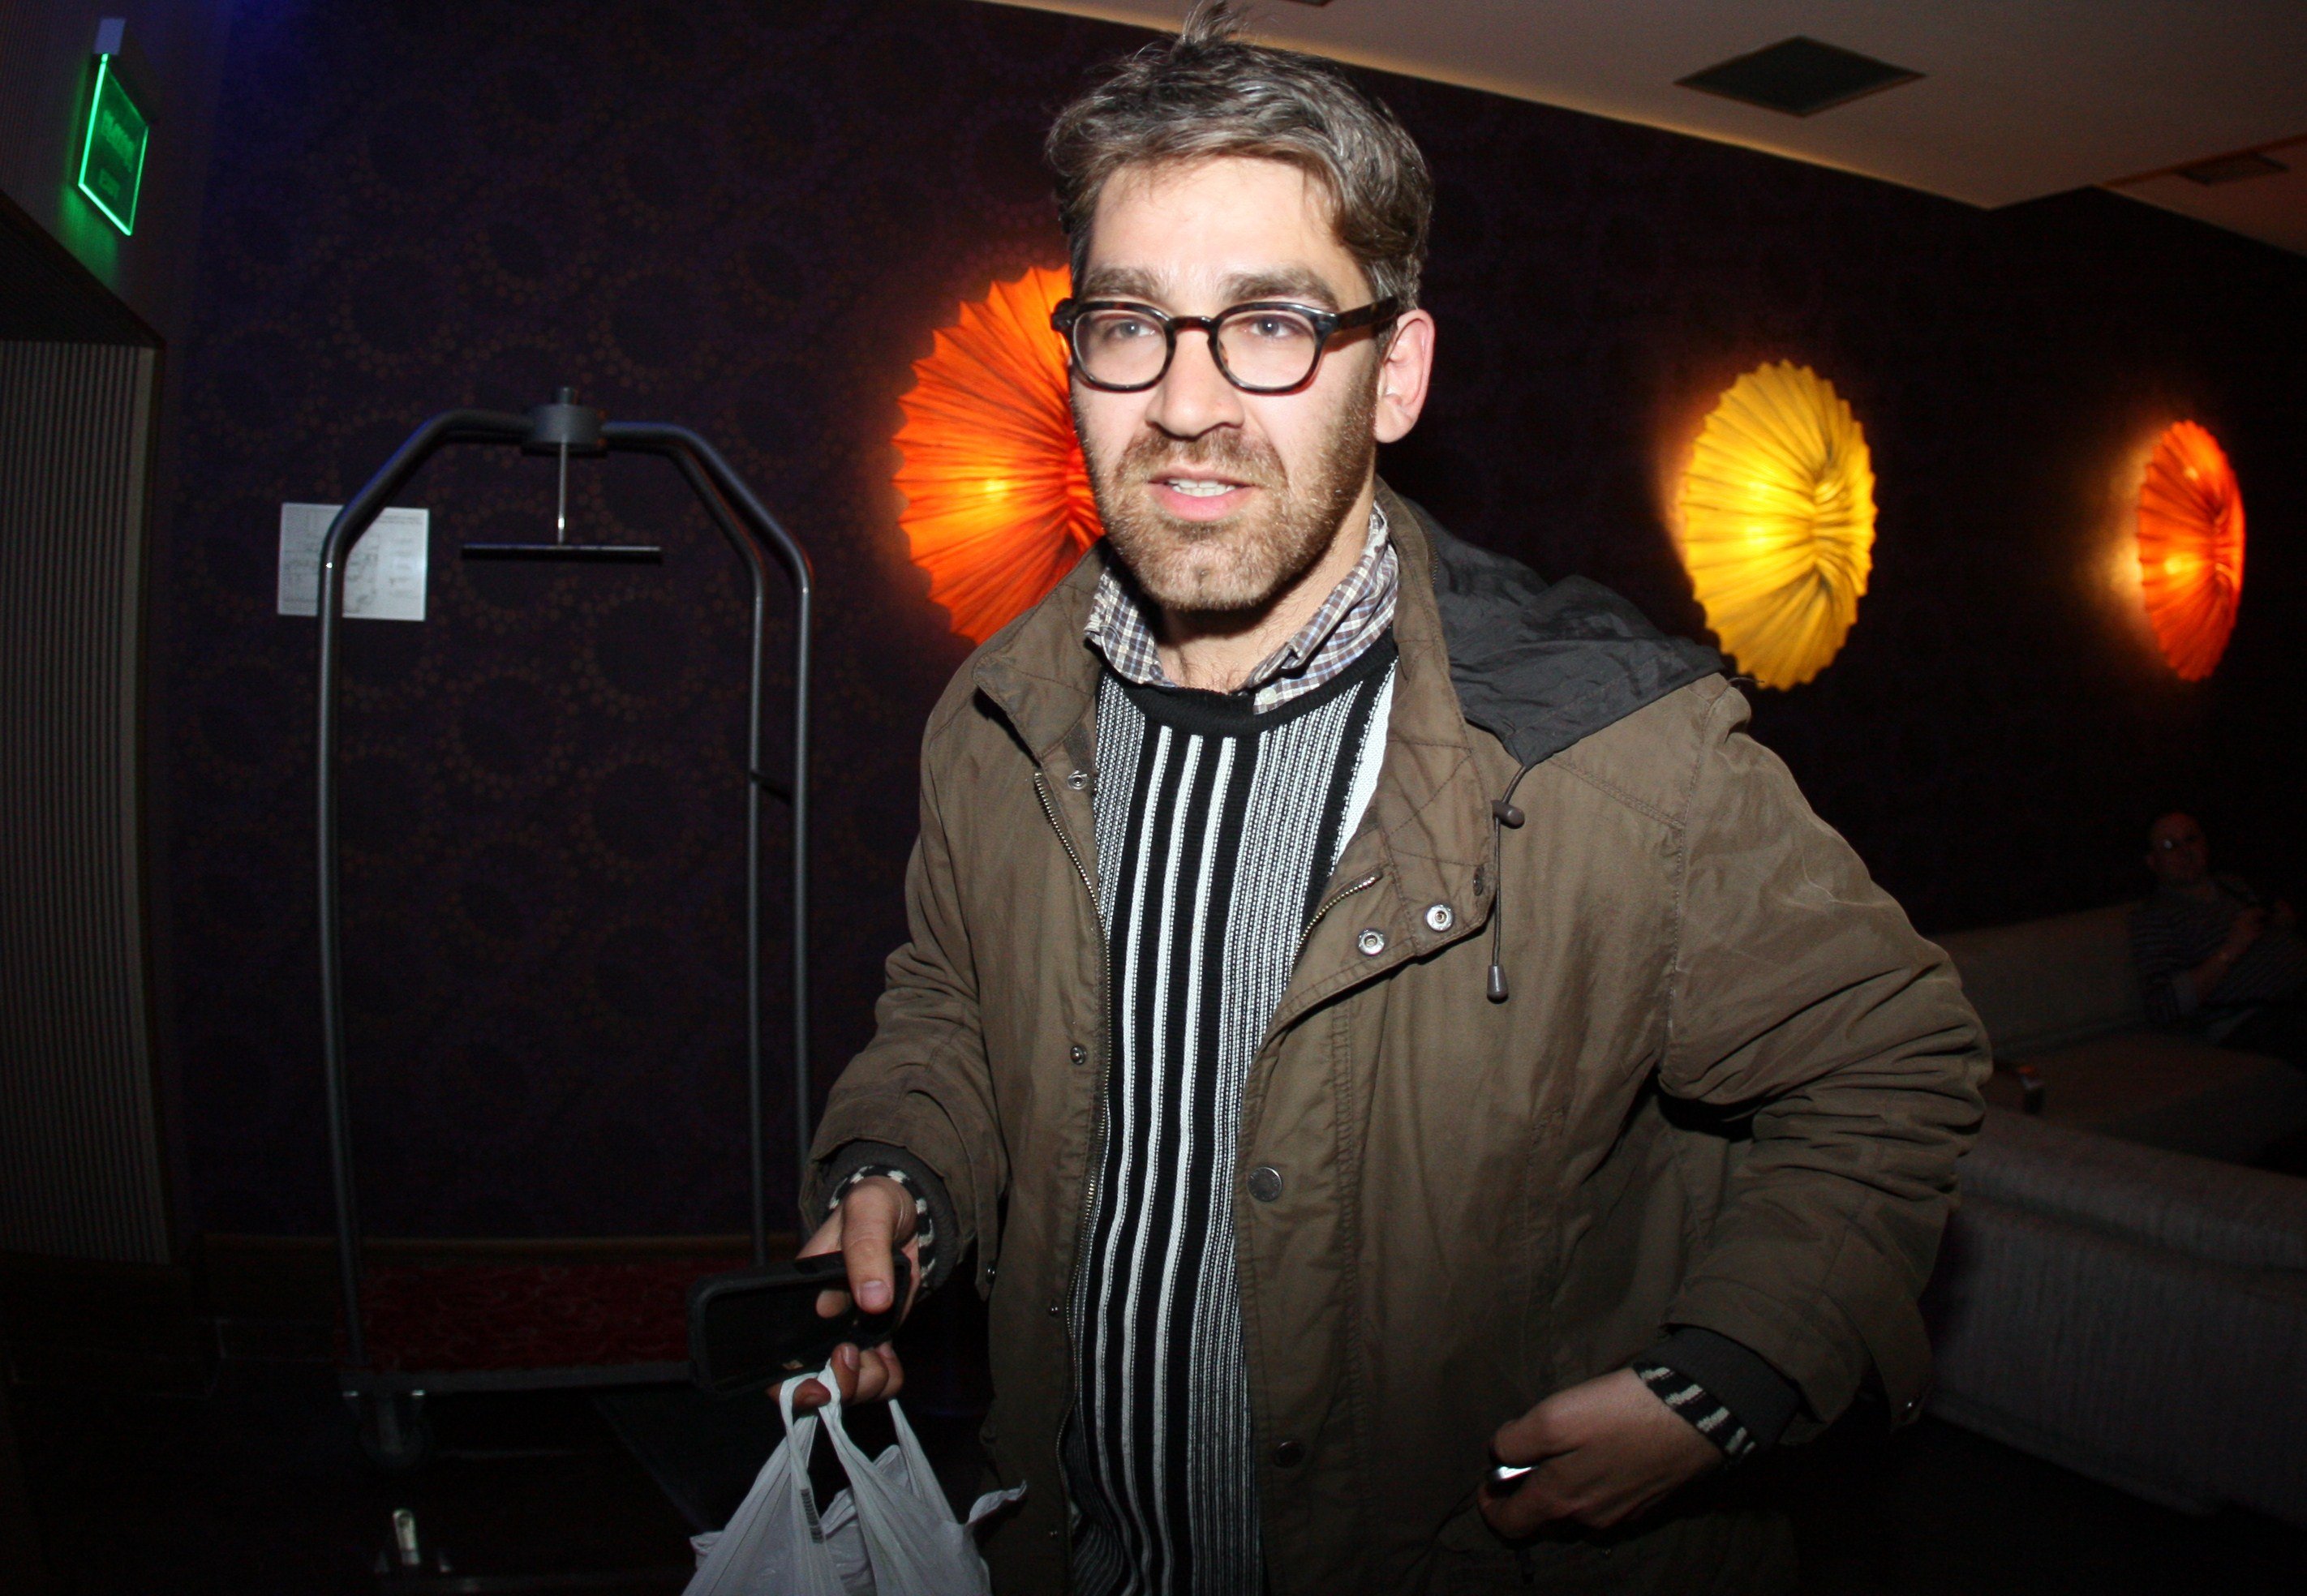 U.S. journalist Simon Ostrovsky, who was abducted and held by pro-Kremlin rebels in east Ukraine this week, arrives in a hotel in the eastern Ukrainian city of Donetsk after being freed, on April 24, 2014.